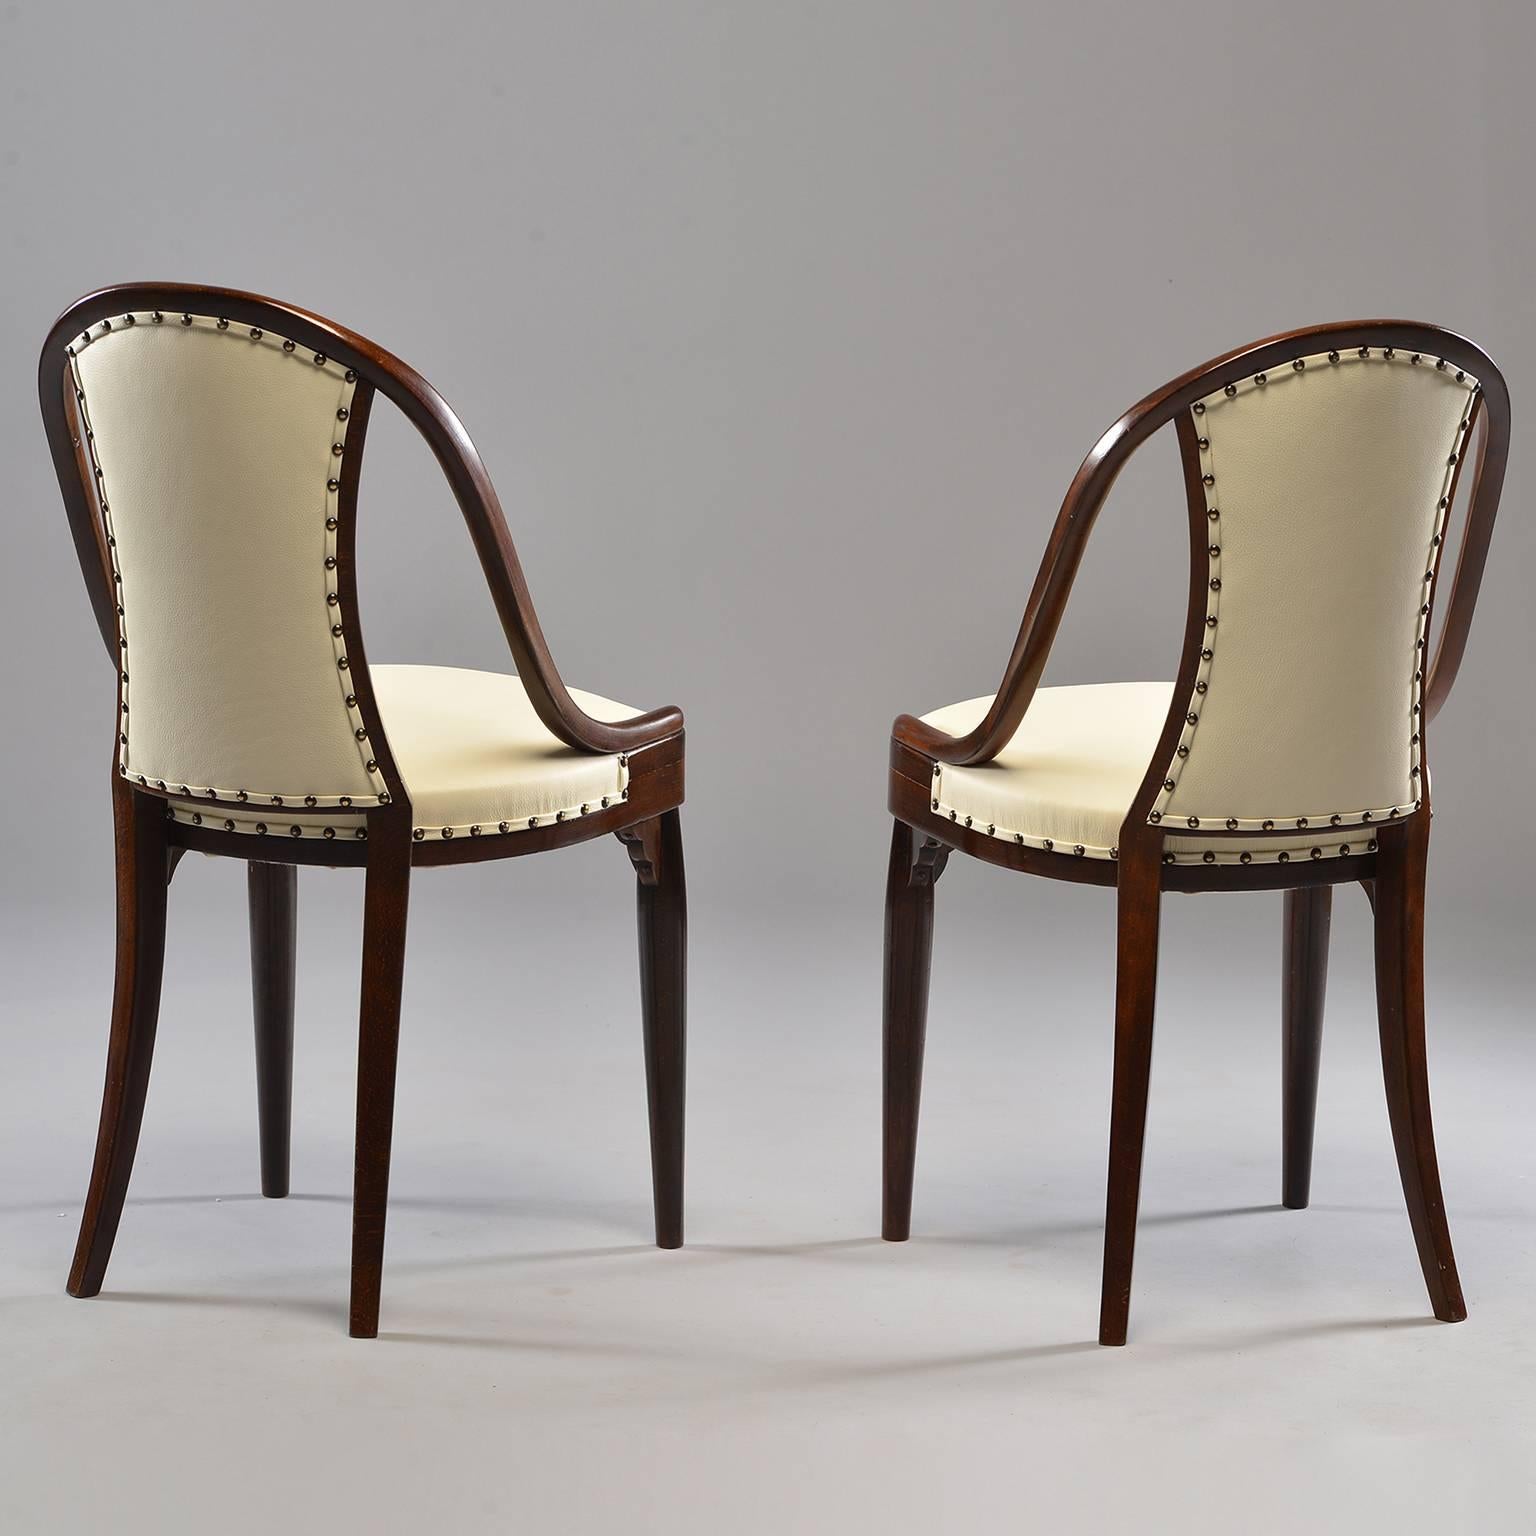 20th Century Six Otto Prutscher for Thonet Bentwood Armchairs with New Leather Upholstery